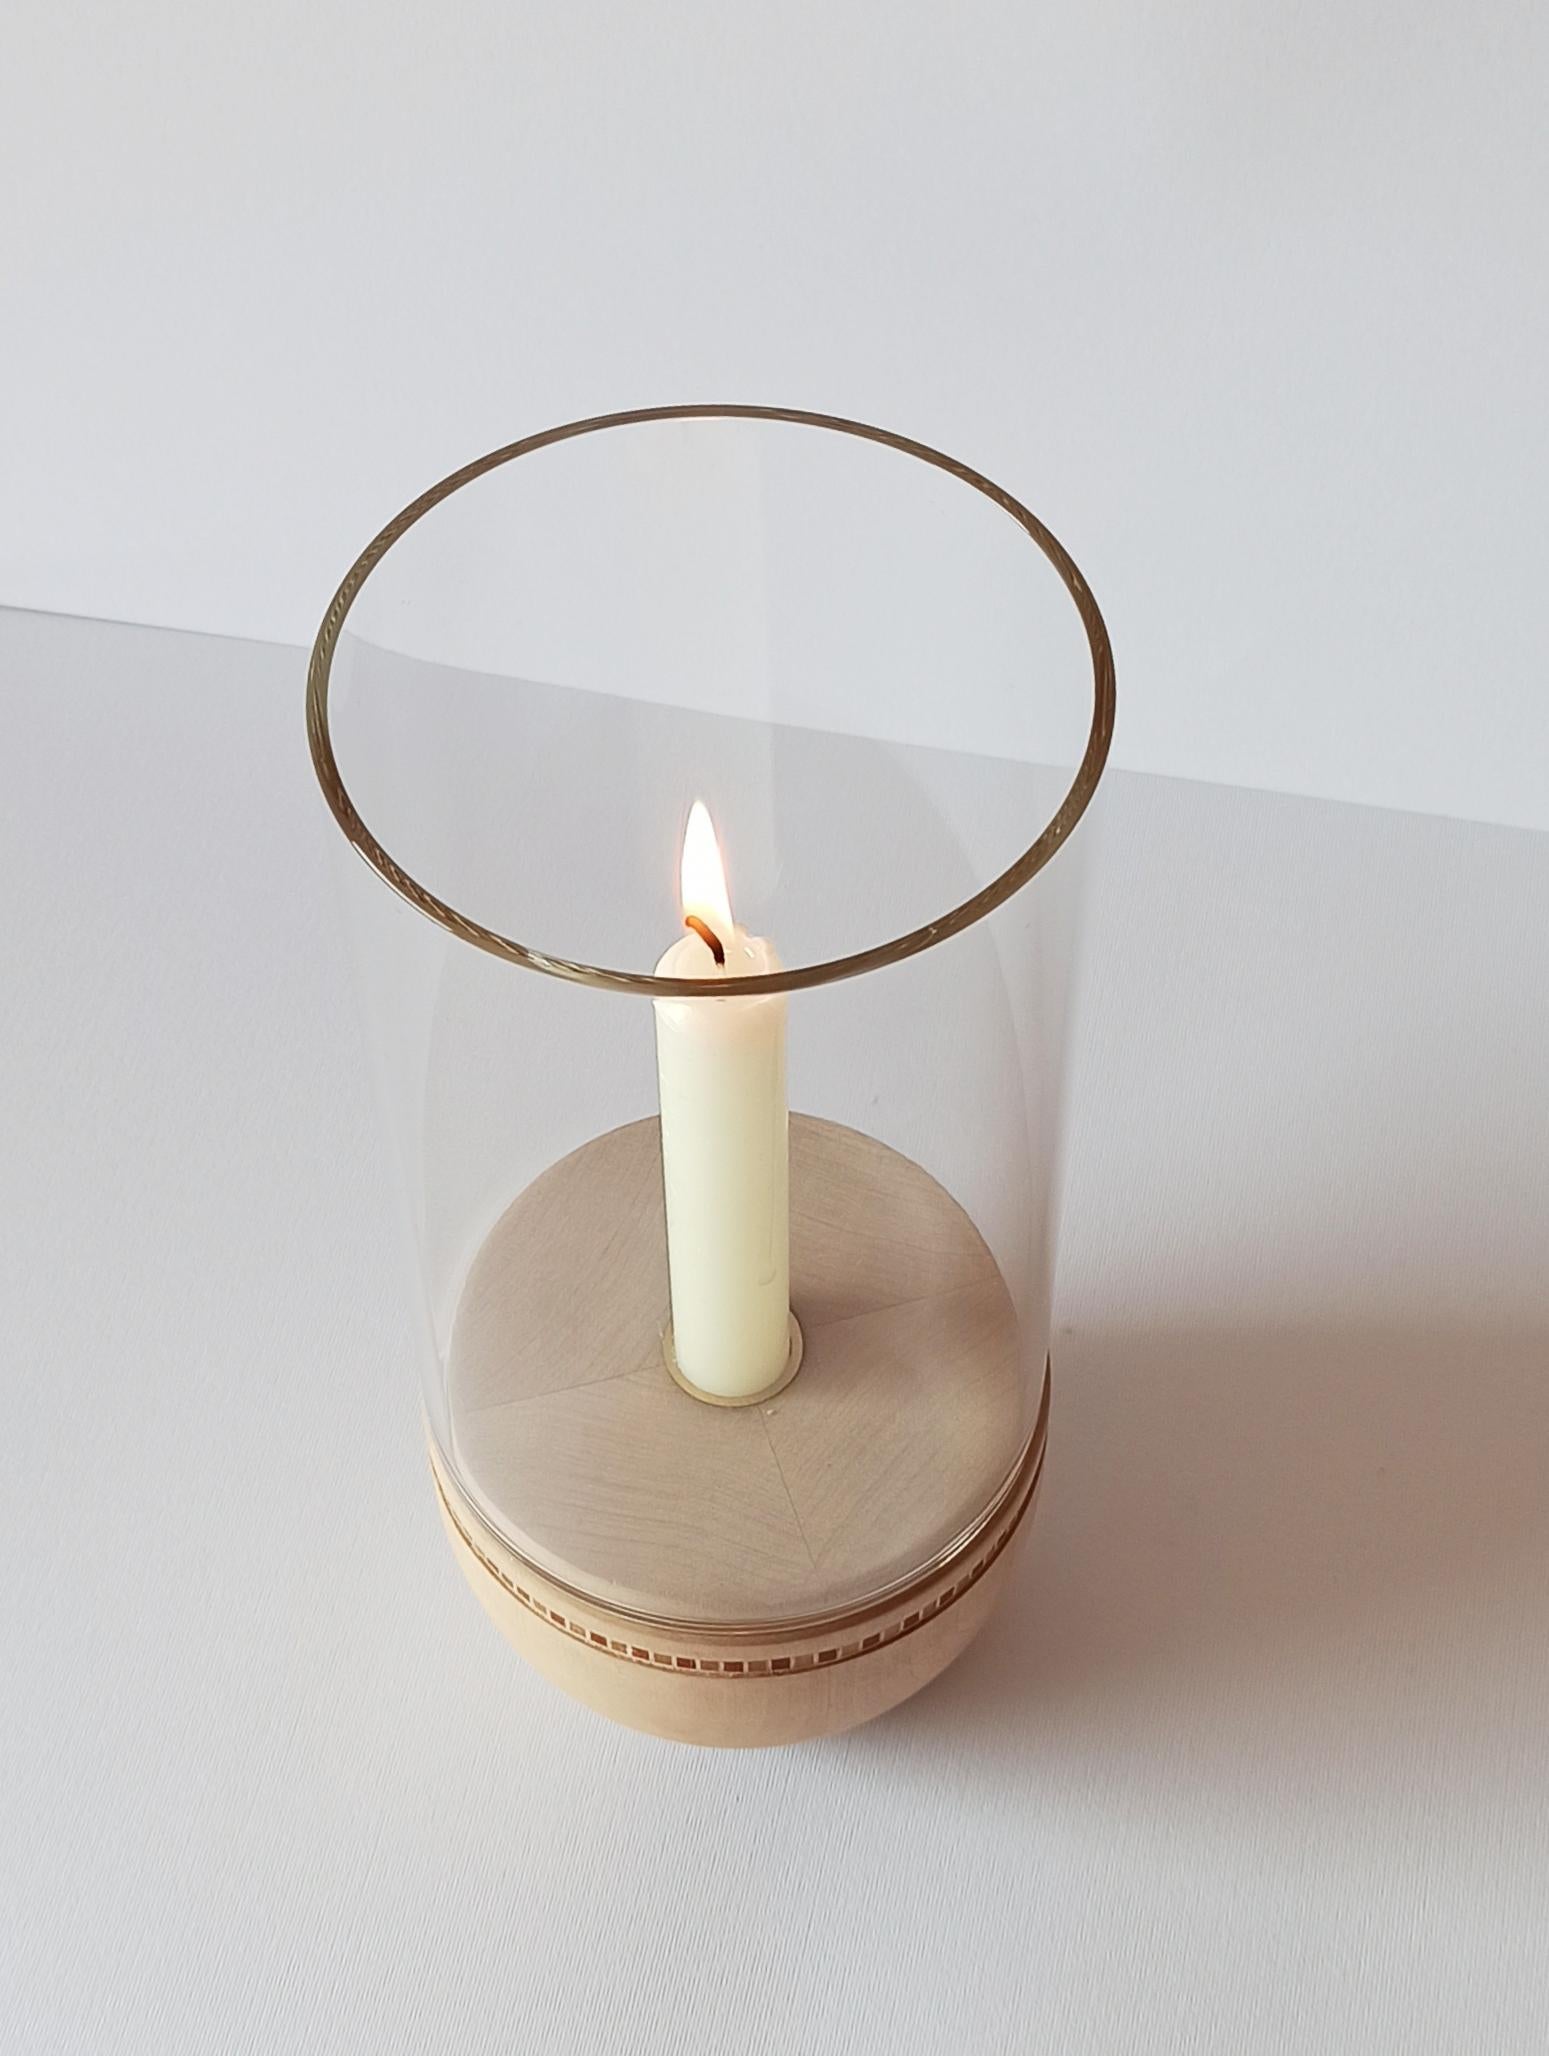 Inspired by old lanterns, Lucille is a collection of candle holders with a simple and minimal style. Made of turned wood, they are adorned with a small inlaid decoration and equipped with a firewall glass. The inlay is inspired by the geometric